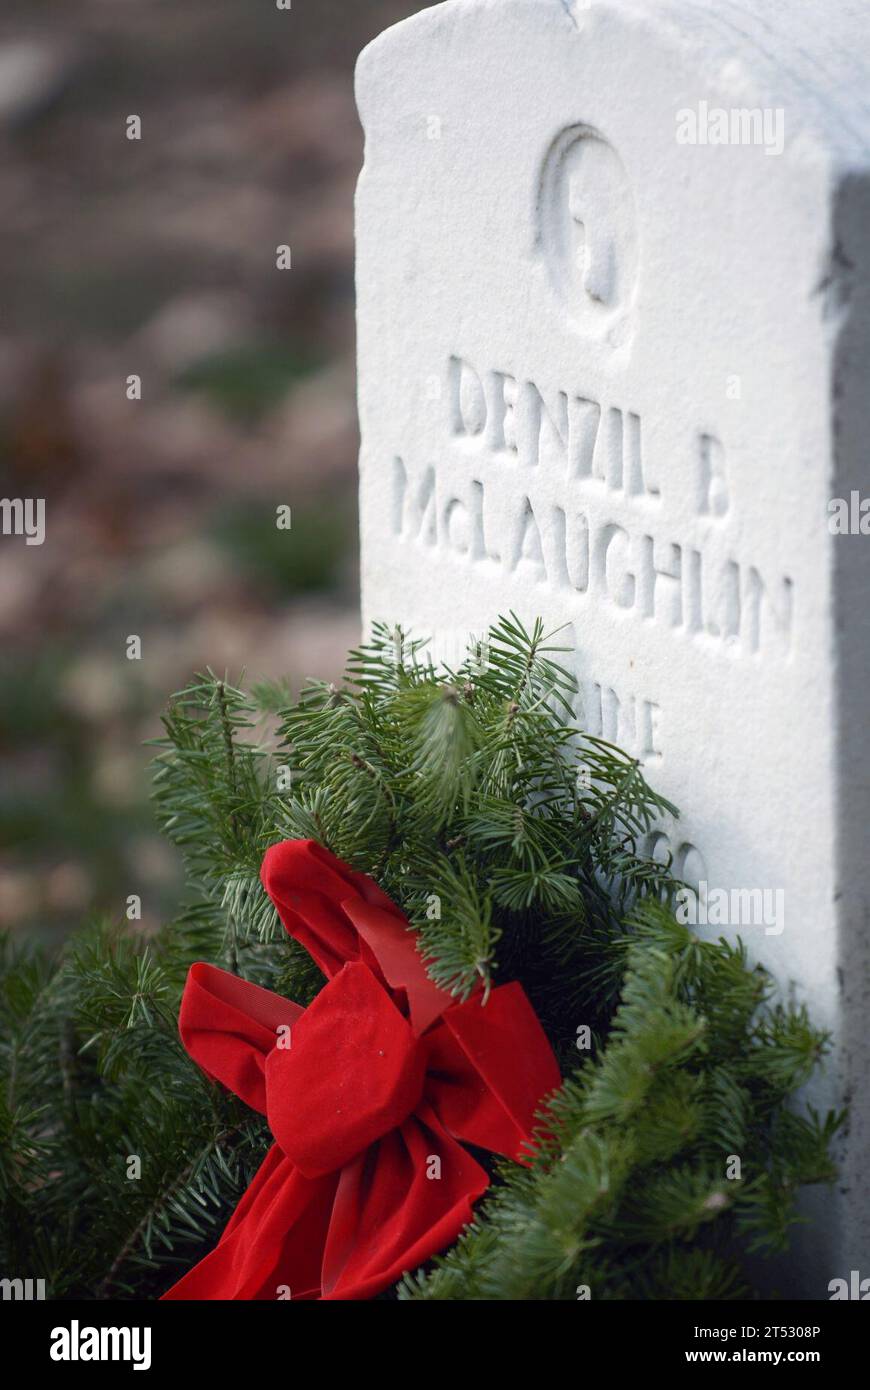 0712150502M-038 ARLINGTON, Va. (Dec. 12, 2007) The final resting place of Private Denzil McLaughlin, a World War I veteran, receives a holiday wreath during the annual Wreaths Across America wreath-laying ceremony. Despite icy winds, more than 1000 volunteers arrived at Arlington National Cemetery to place 10,000 holiday wreaths on the graves in section 33. This year marked the first year that simultaneous ceremonies were conducted in veteran cemeteries and monuments worldwide. U.S. Navy Stock Photo